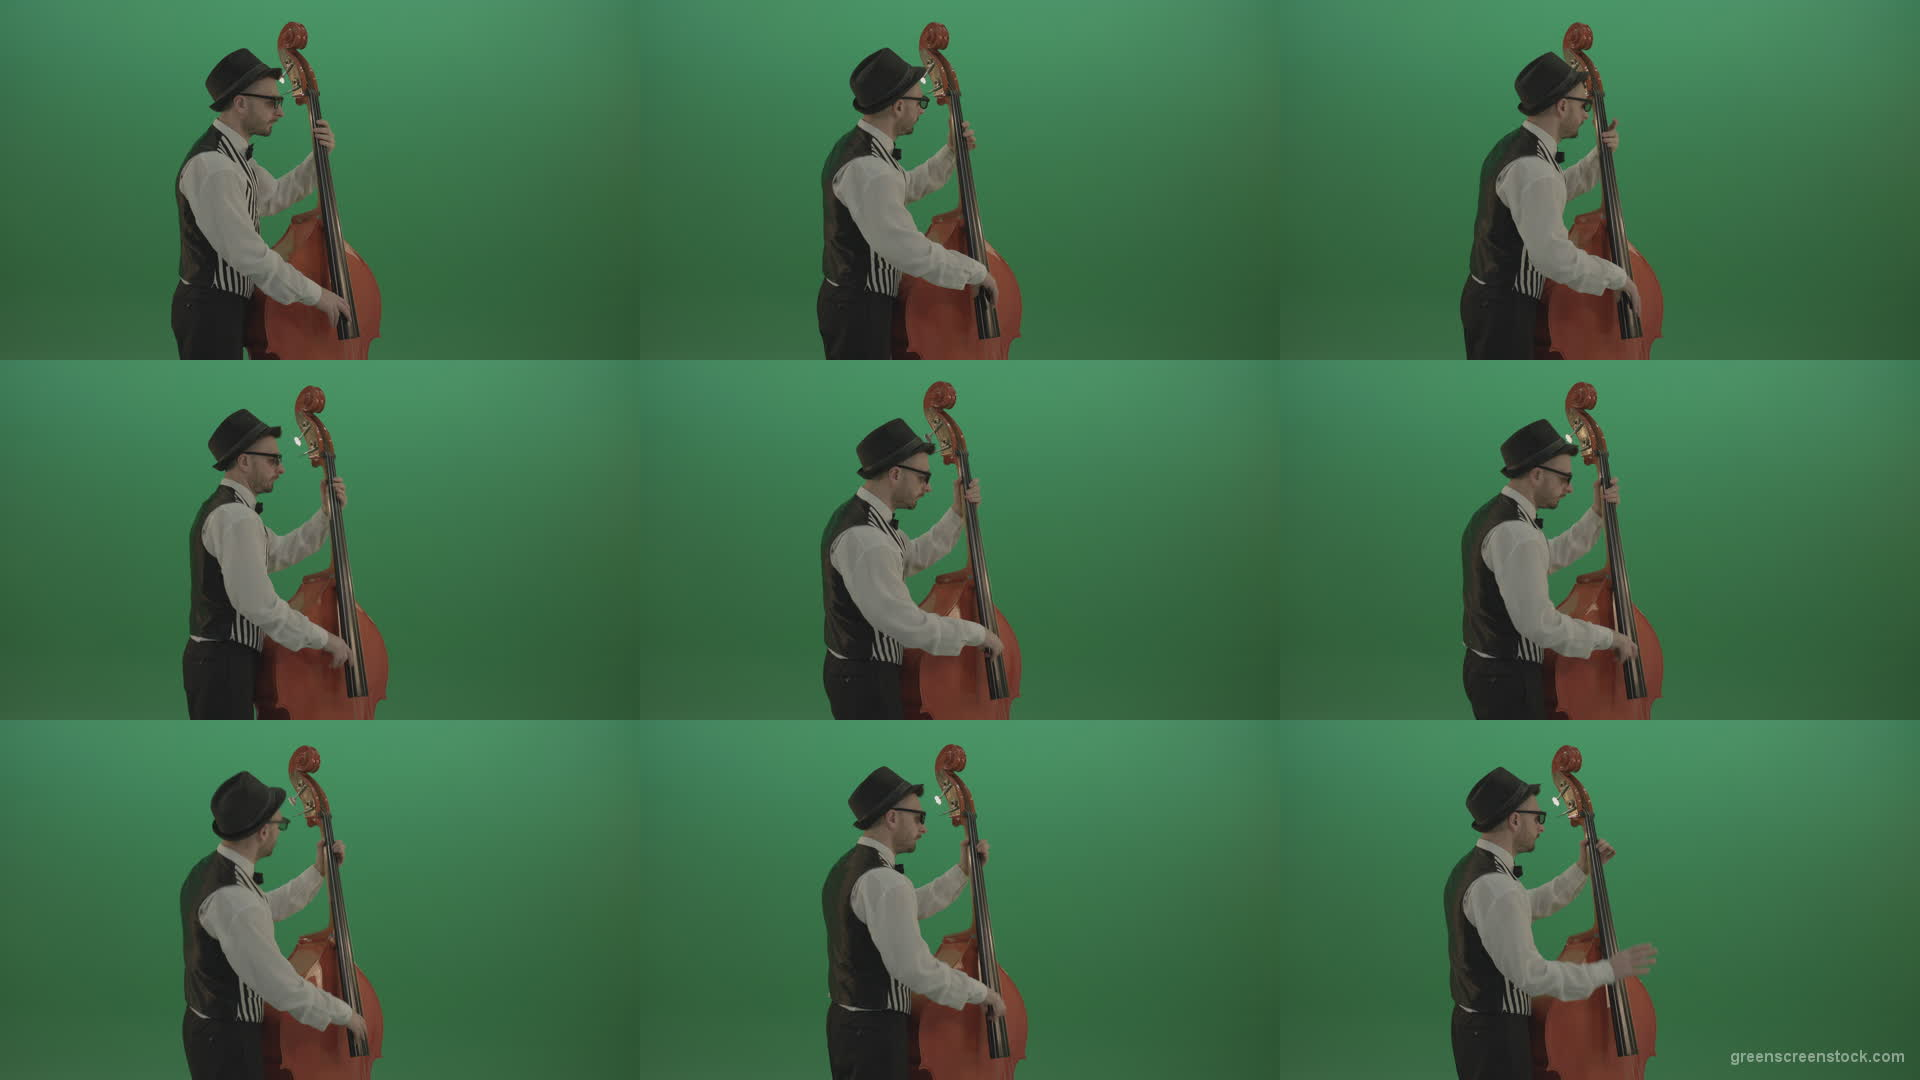 Young-Man-play-jazz-on-double-bass-String-music-instrument-isolated-on-green-screen-in-back-side-view Green Screen Stock